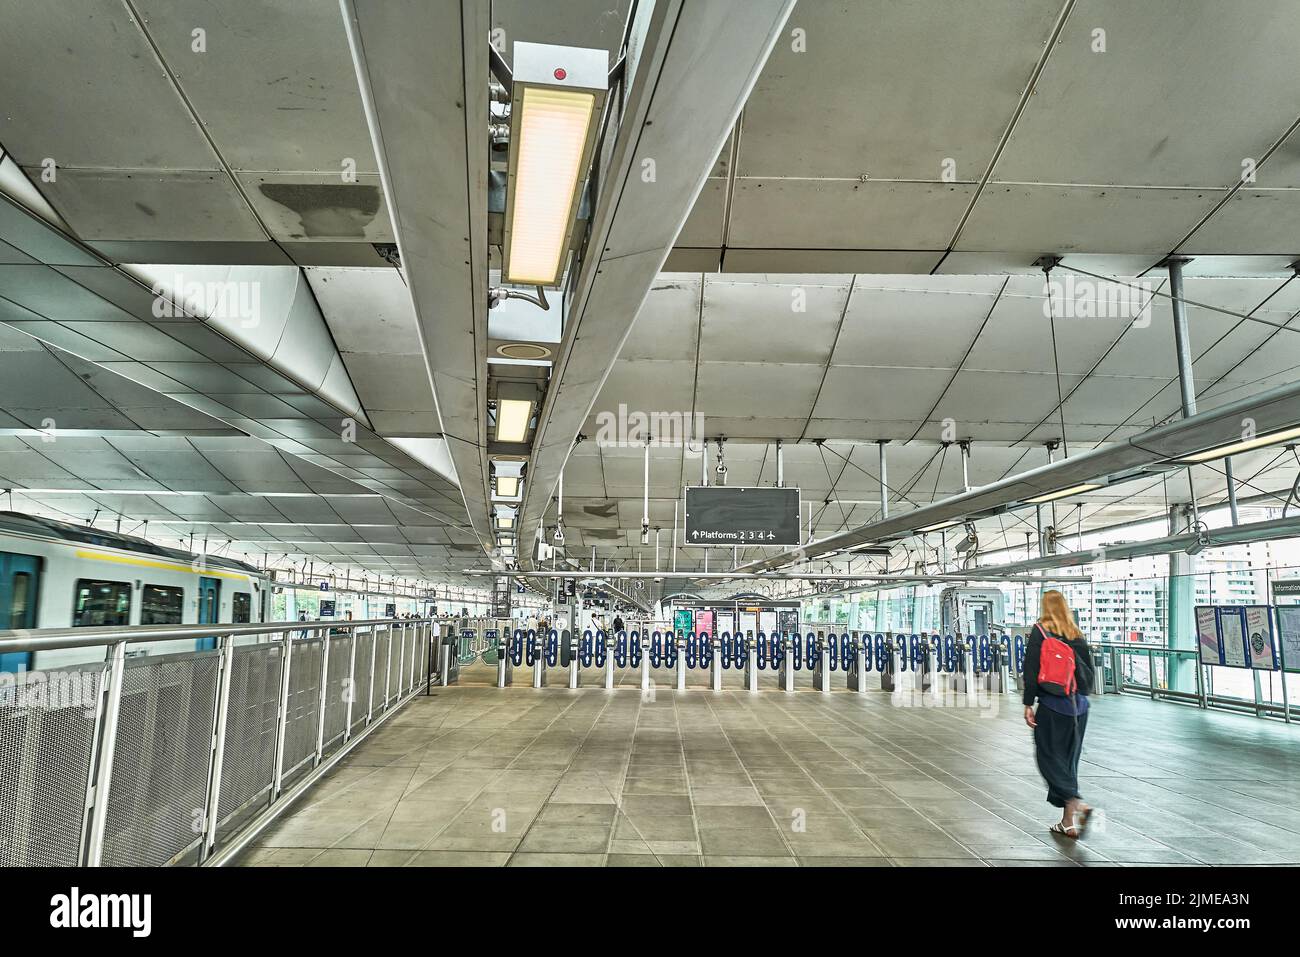 A traveler in the concourse near the ticket barrier at Blackfriars rail station, London, England. Stock Photo